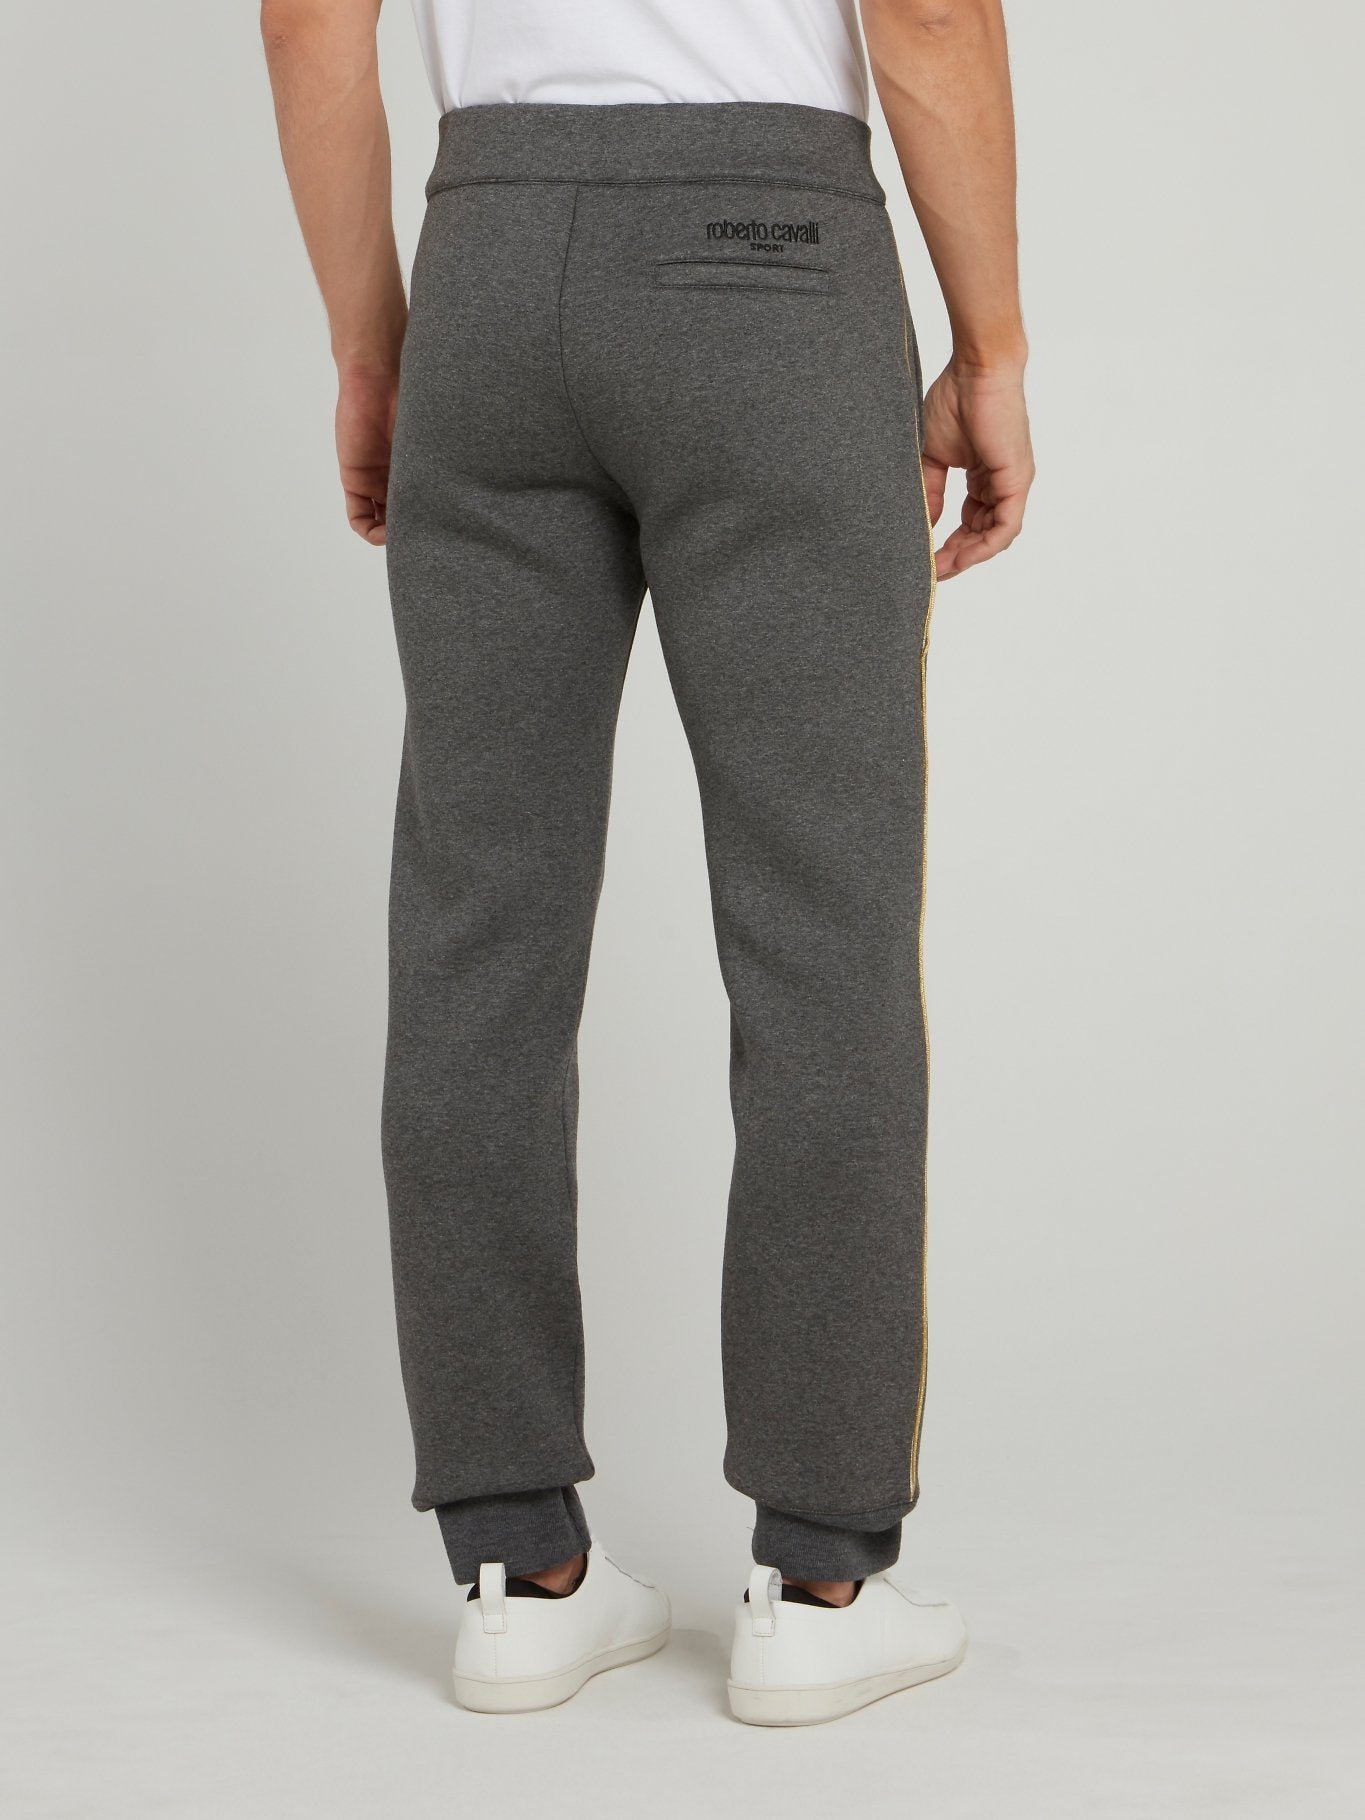 Solid Grey Track Pants